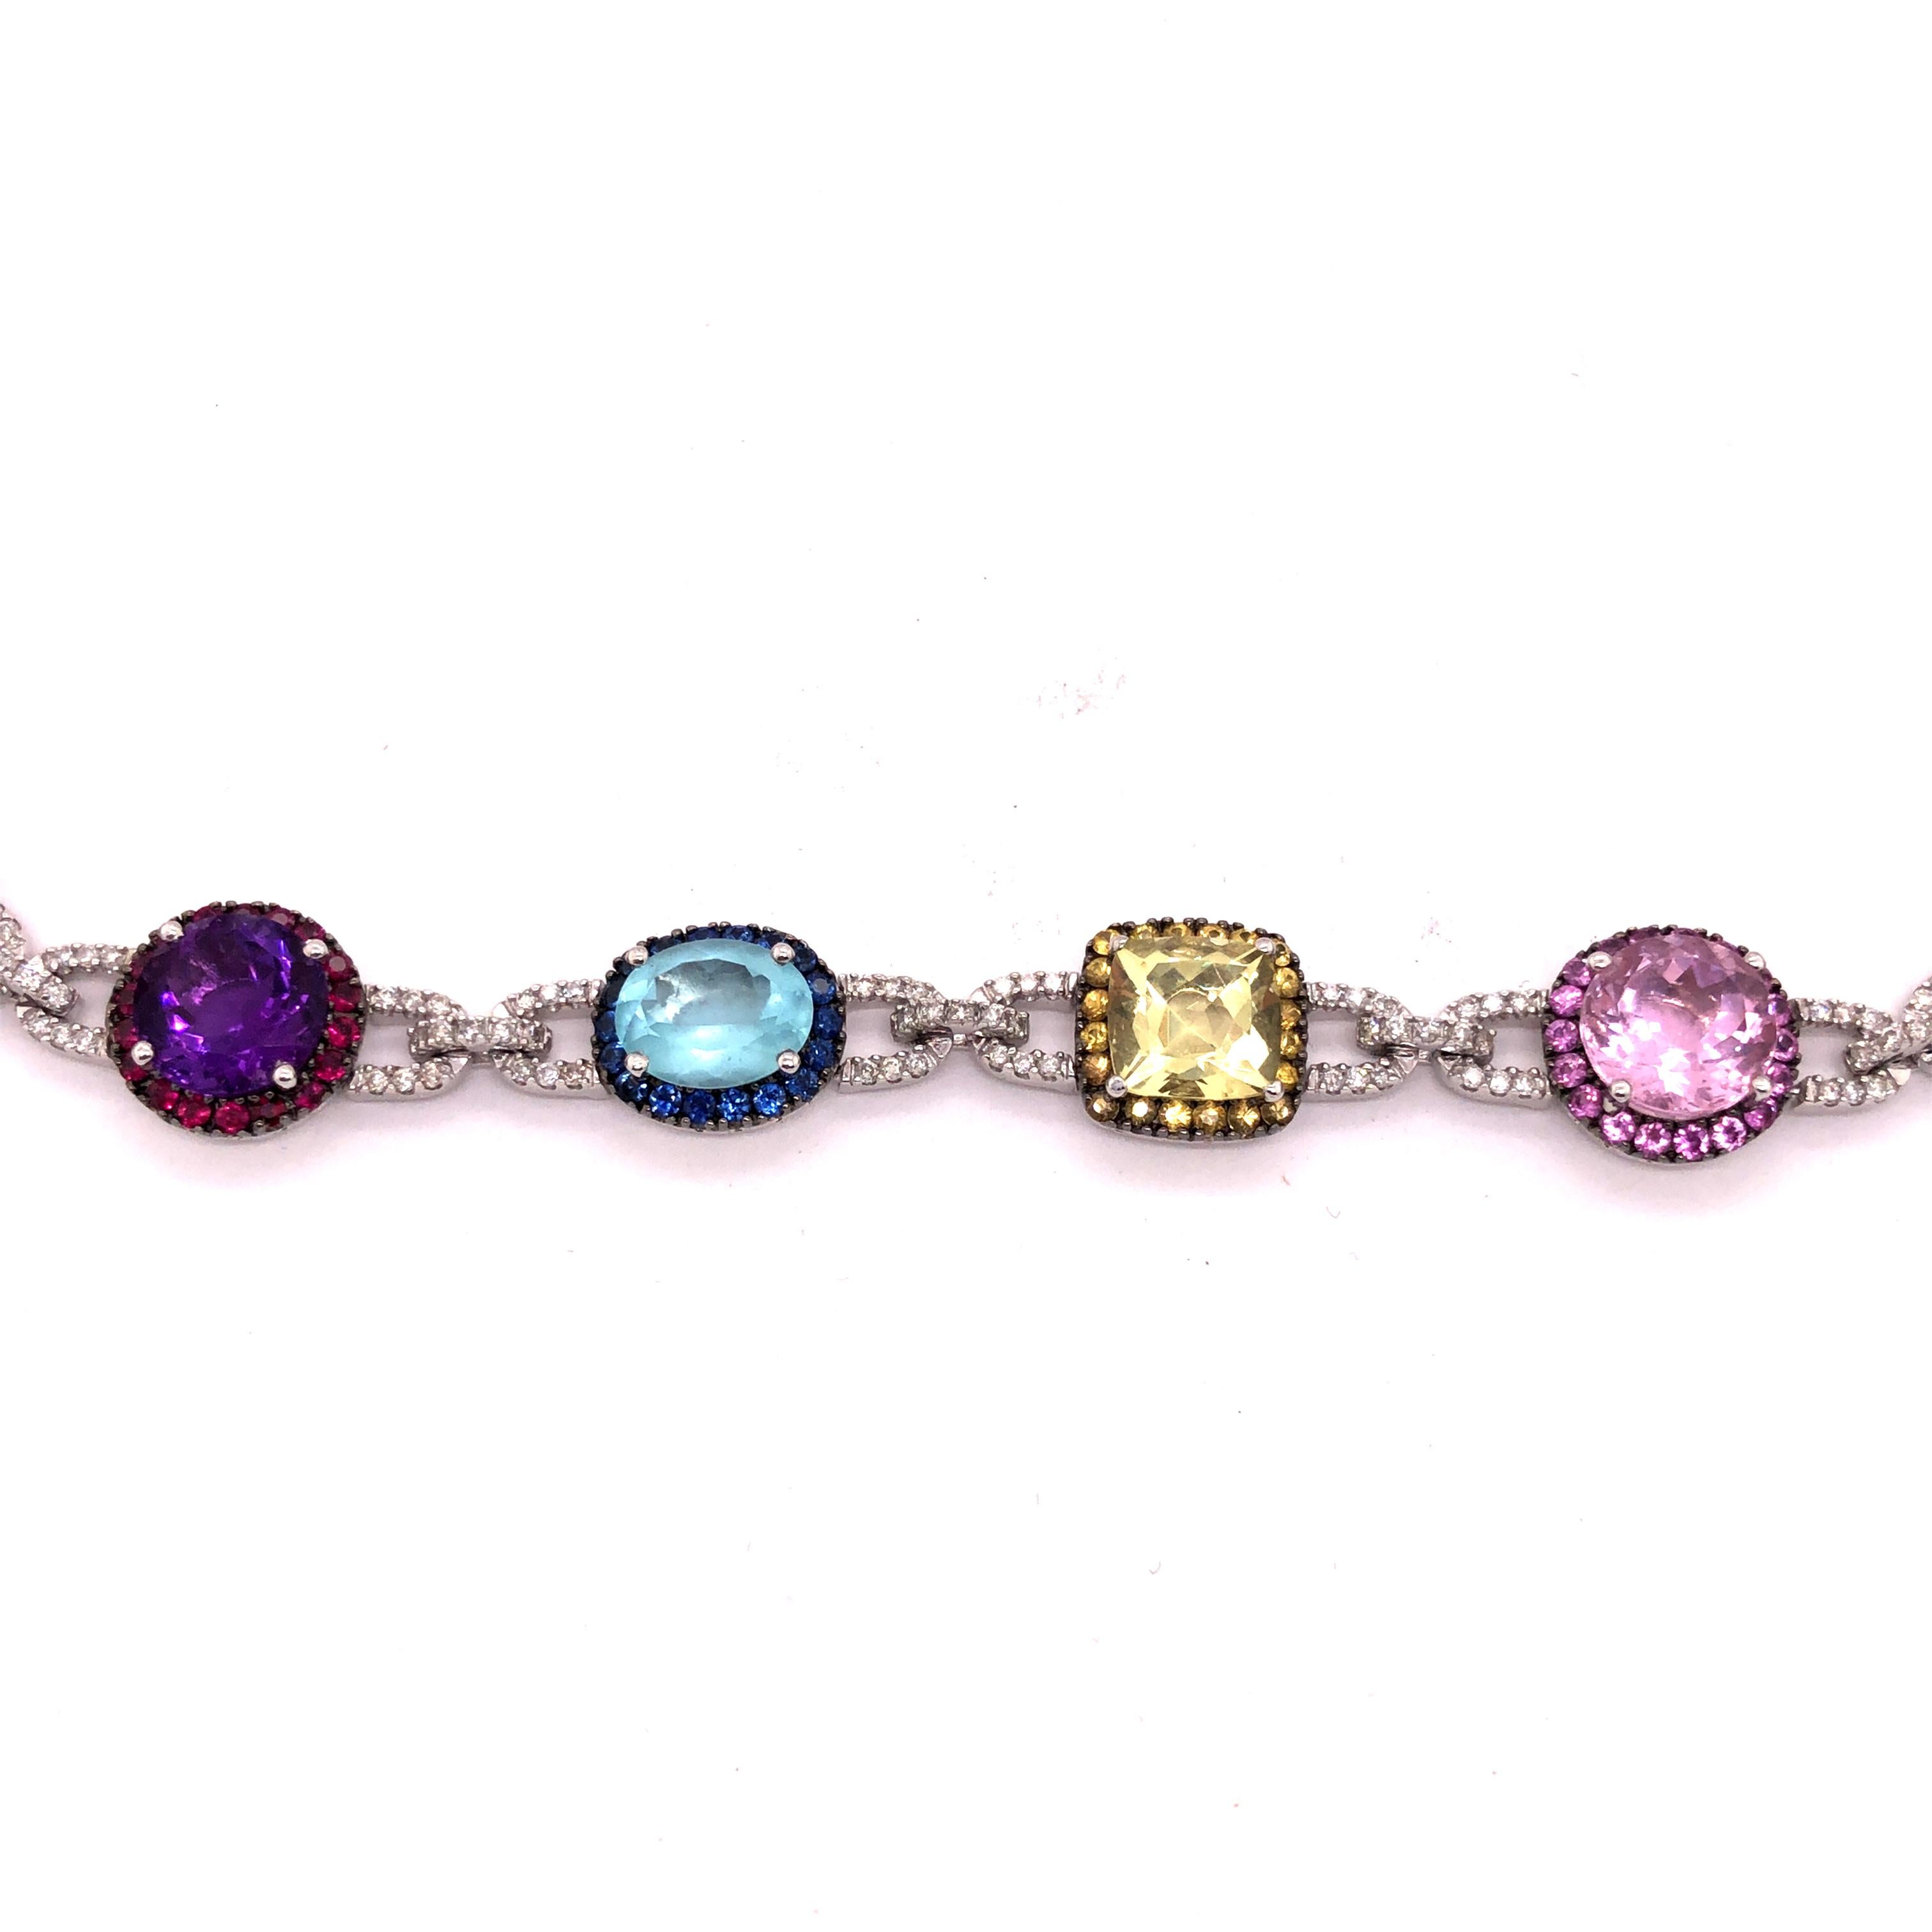 Designed as alternating multi-colored gemstones set within a gemstone frame join by diamond set links and suspending a detachable drop

Metal: 14k white and white gold

Diamonds:  approximate total weight of 2.62 carats
Stones: amethysts, citrines, 